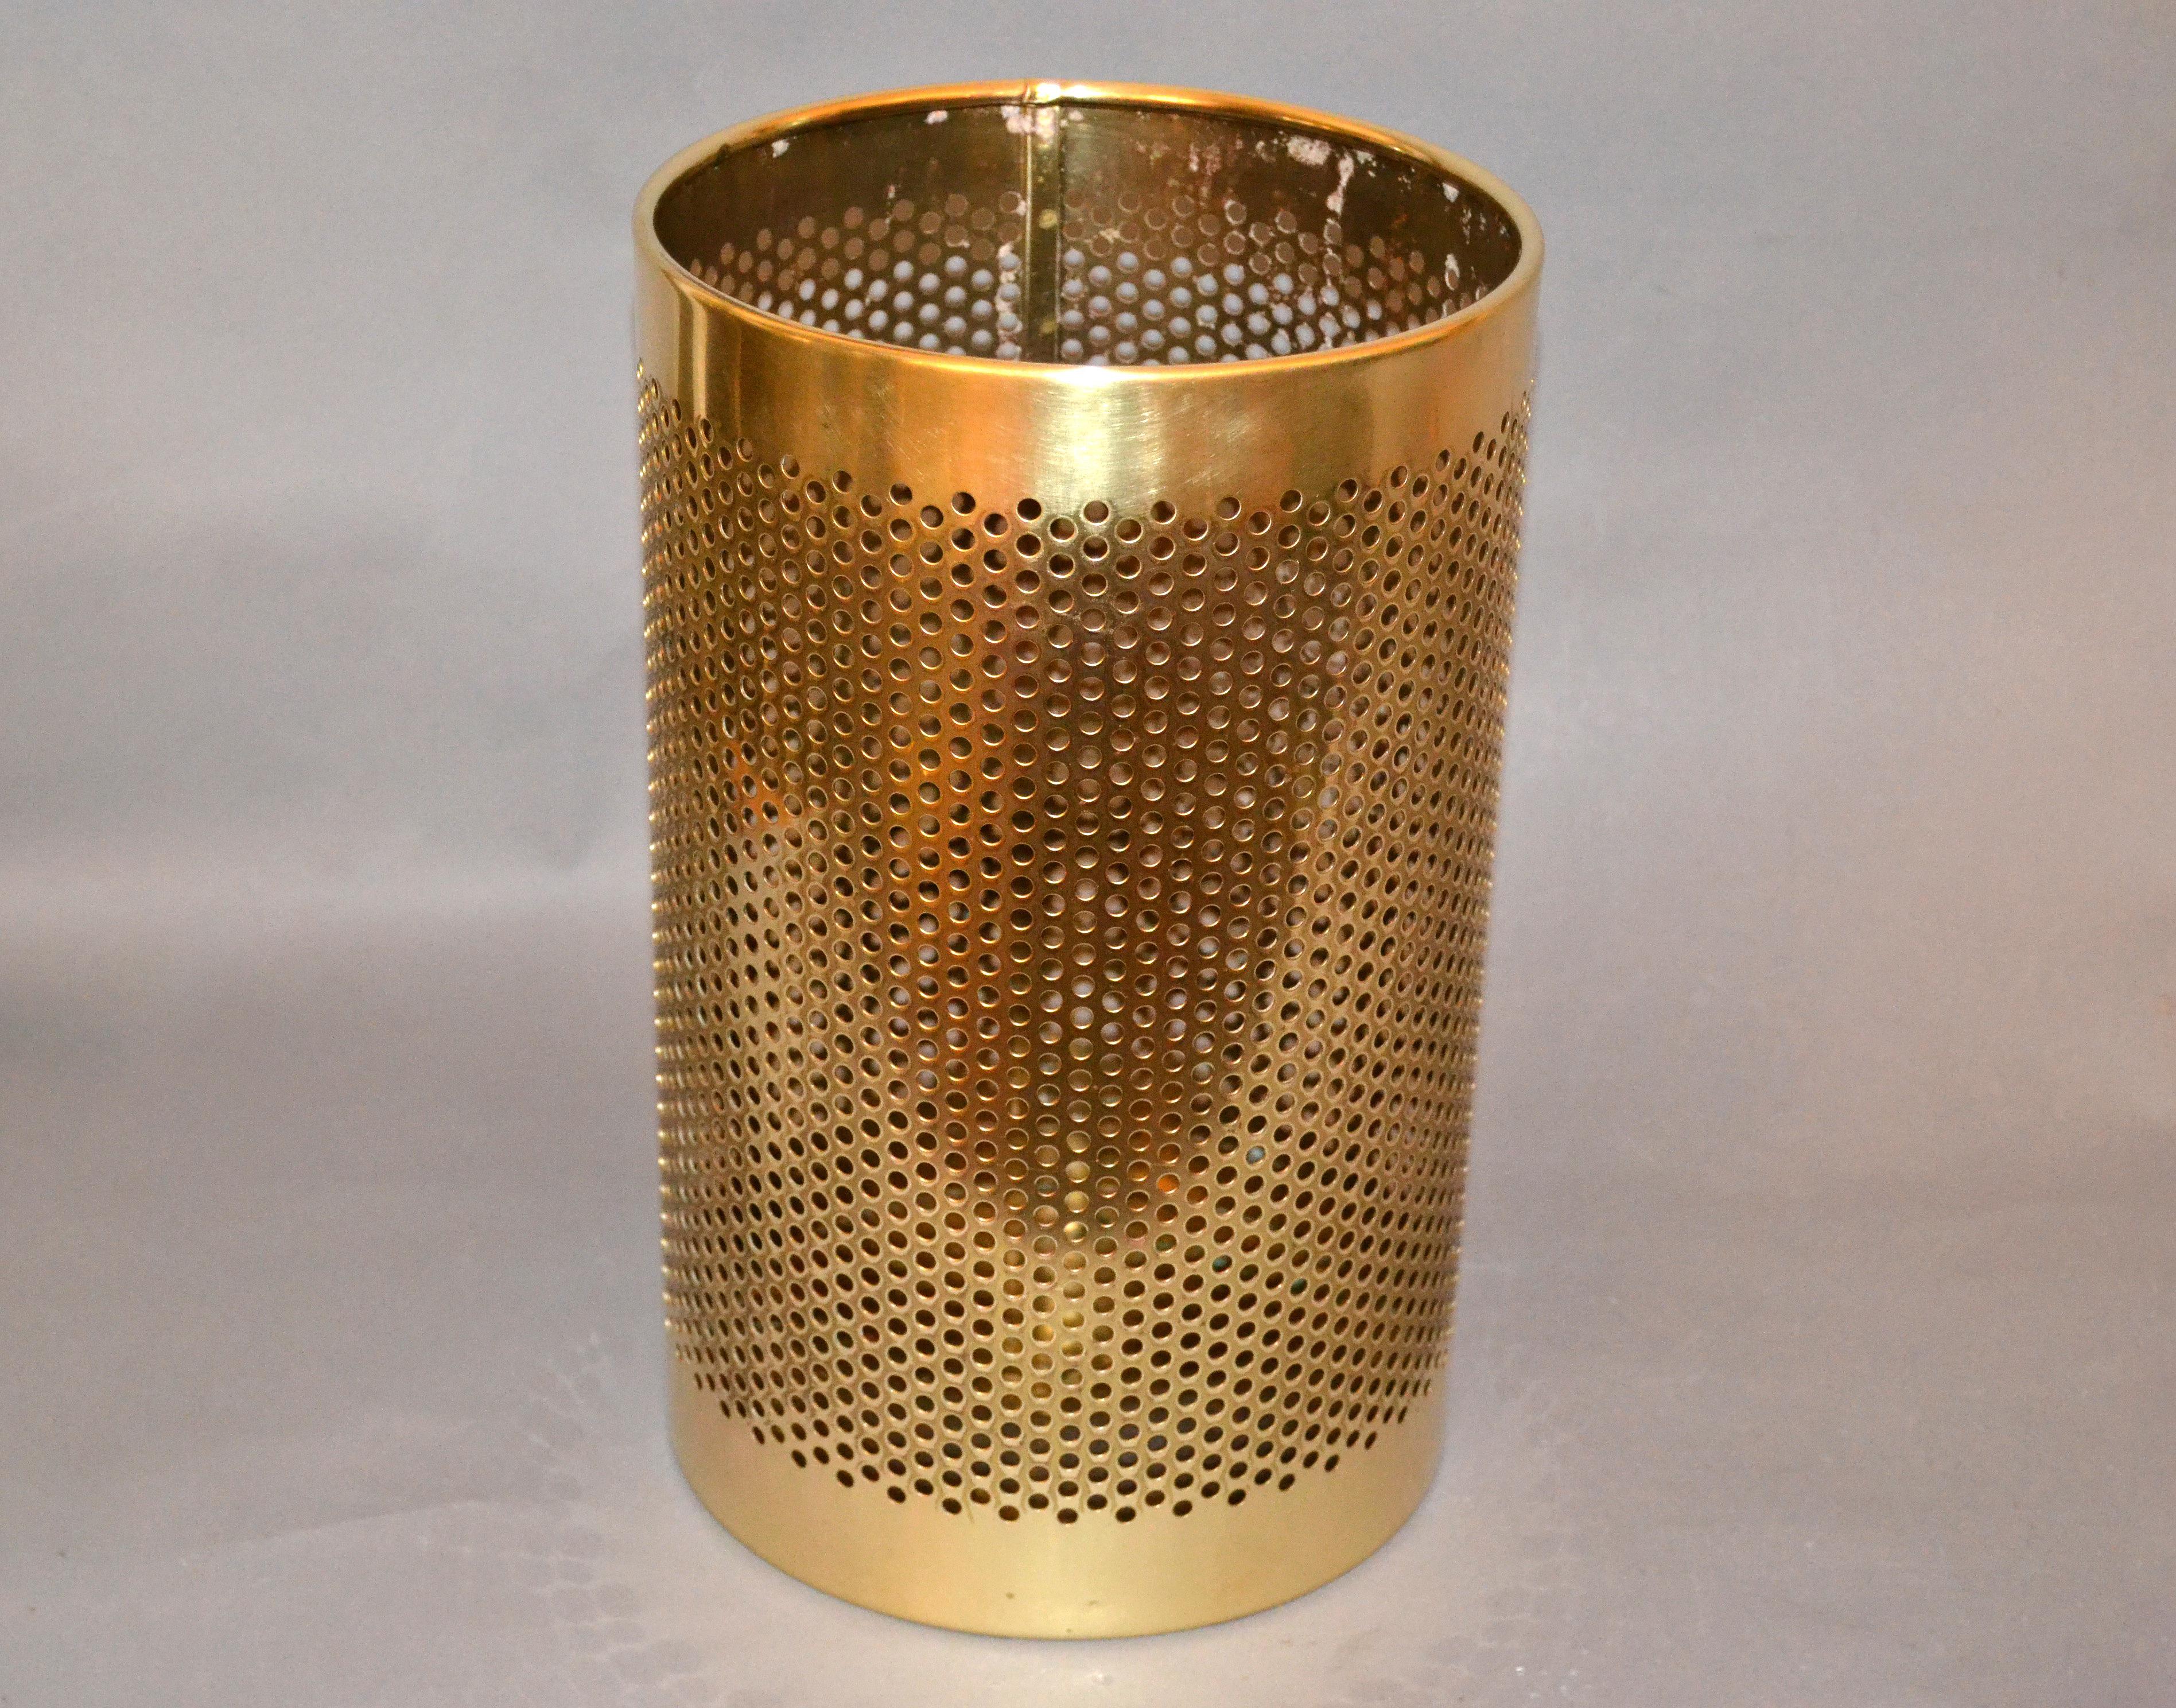 Vintage Frontgate Brass Italian Perforated Trash Waste Basket, Waste Can made in Italy.
Marked underneath.